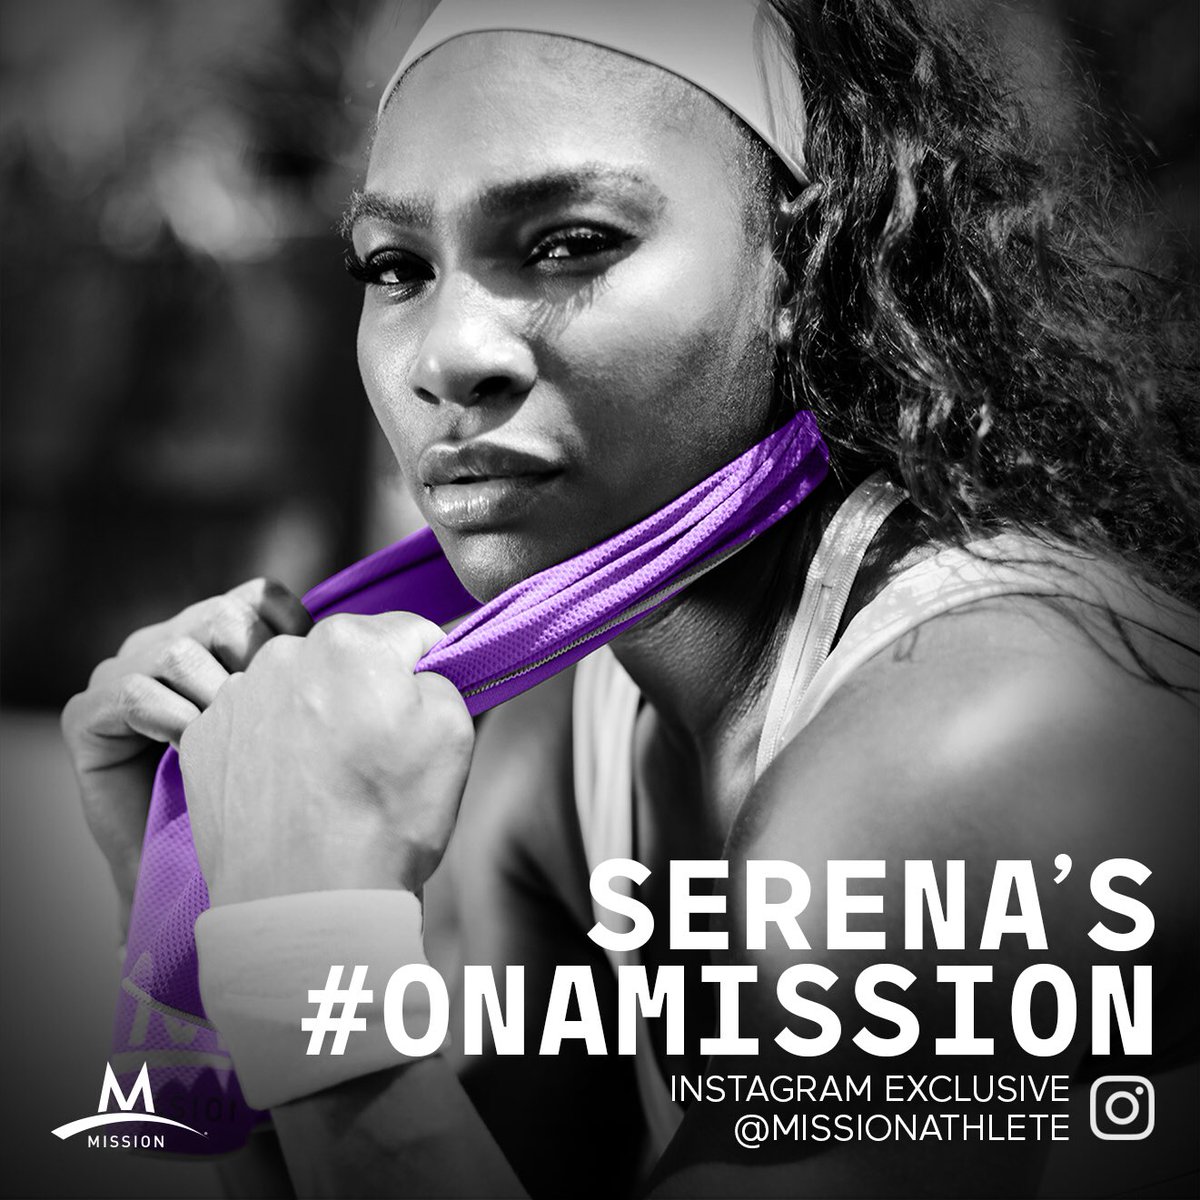 Do not forget to follow @missionathlete on IG for today's #usopen moment! https://t.co/lBX1ajAFsl